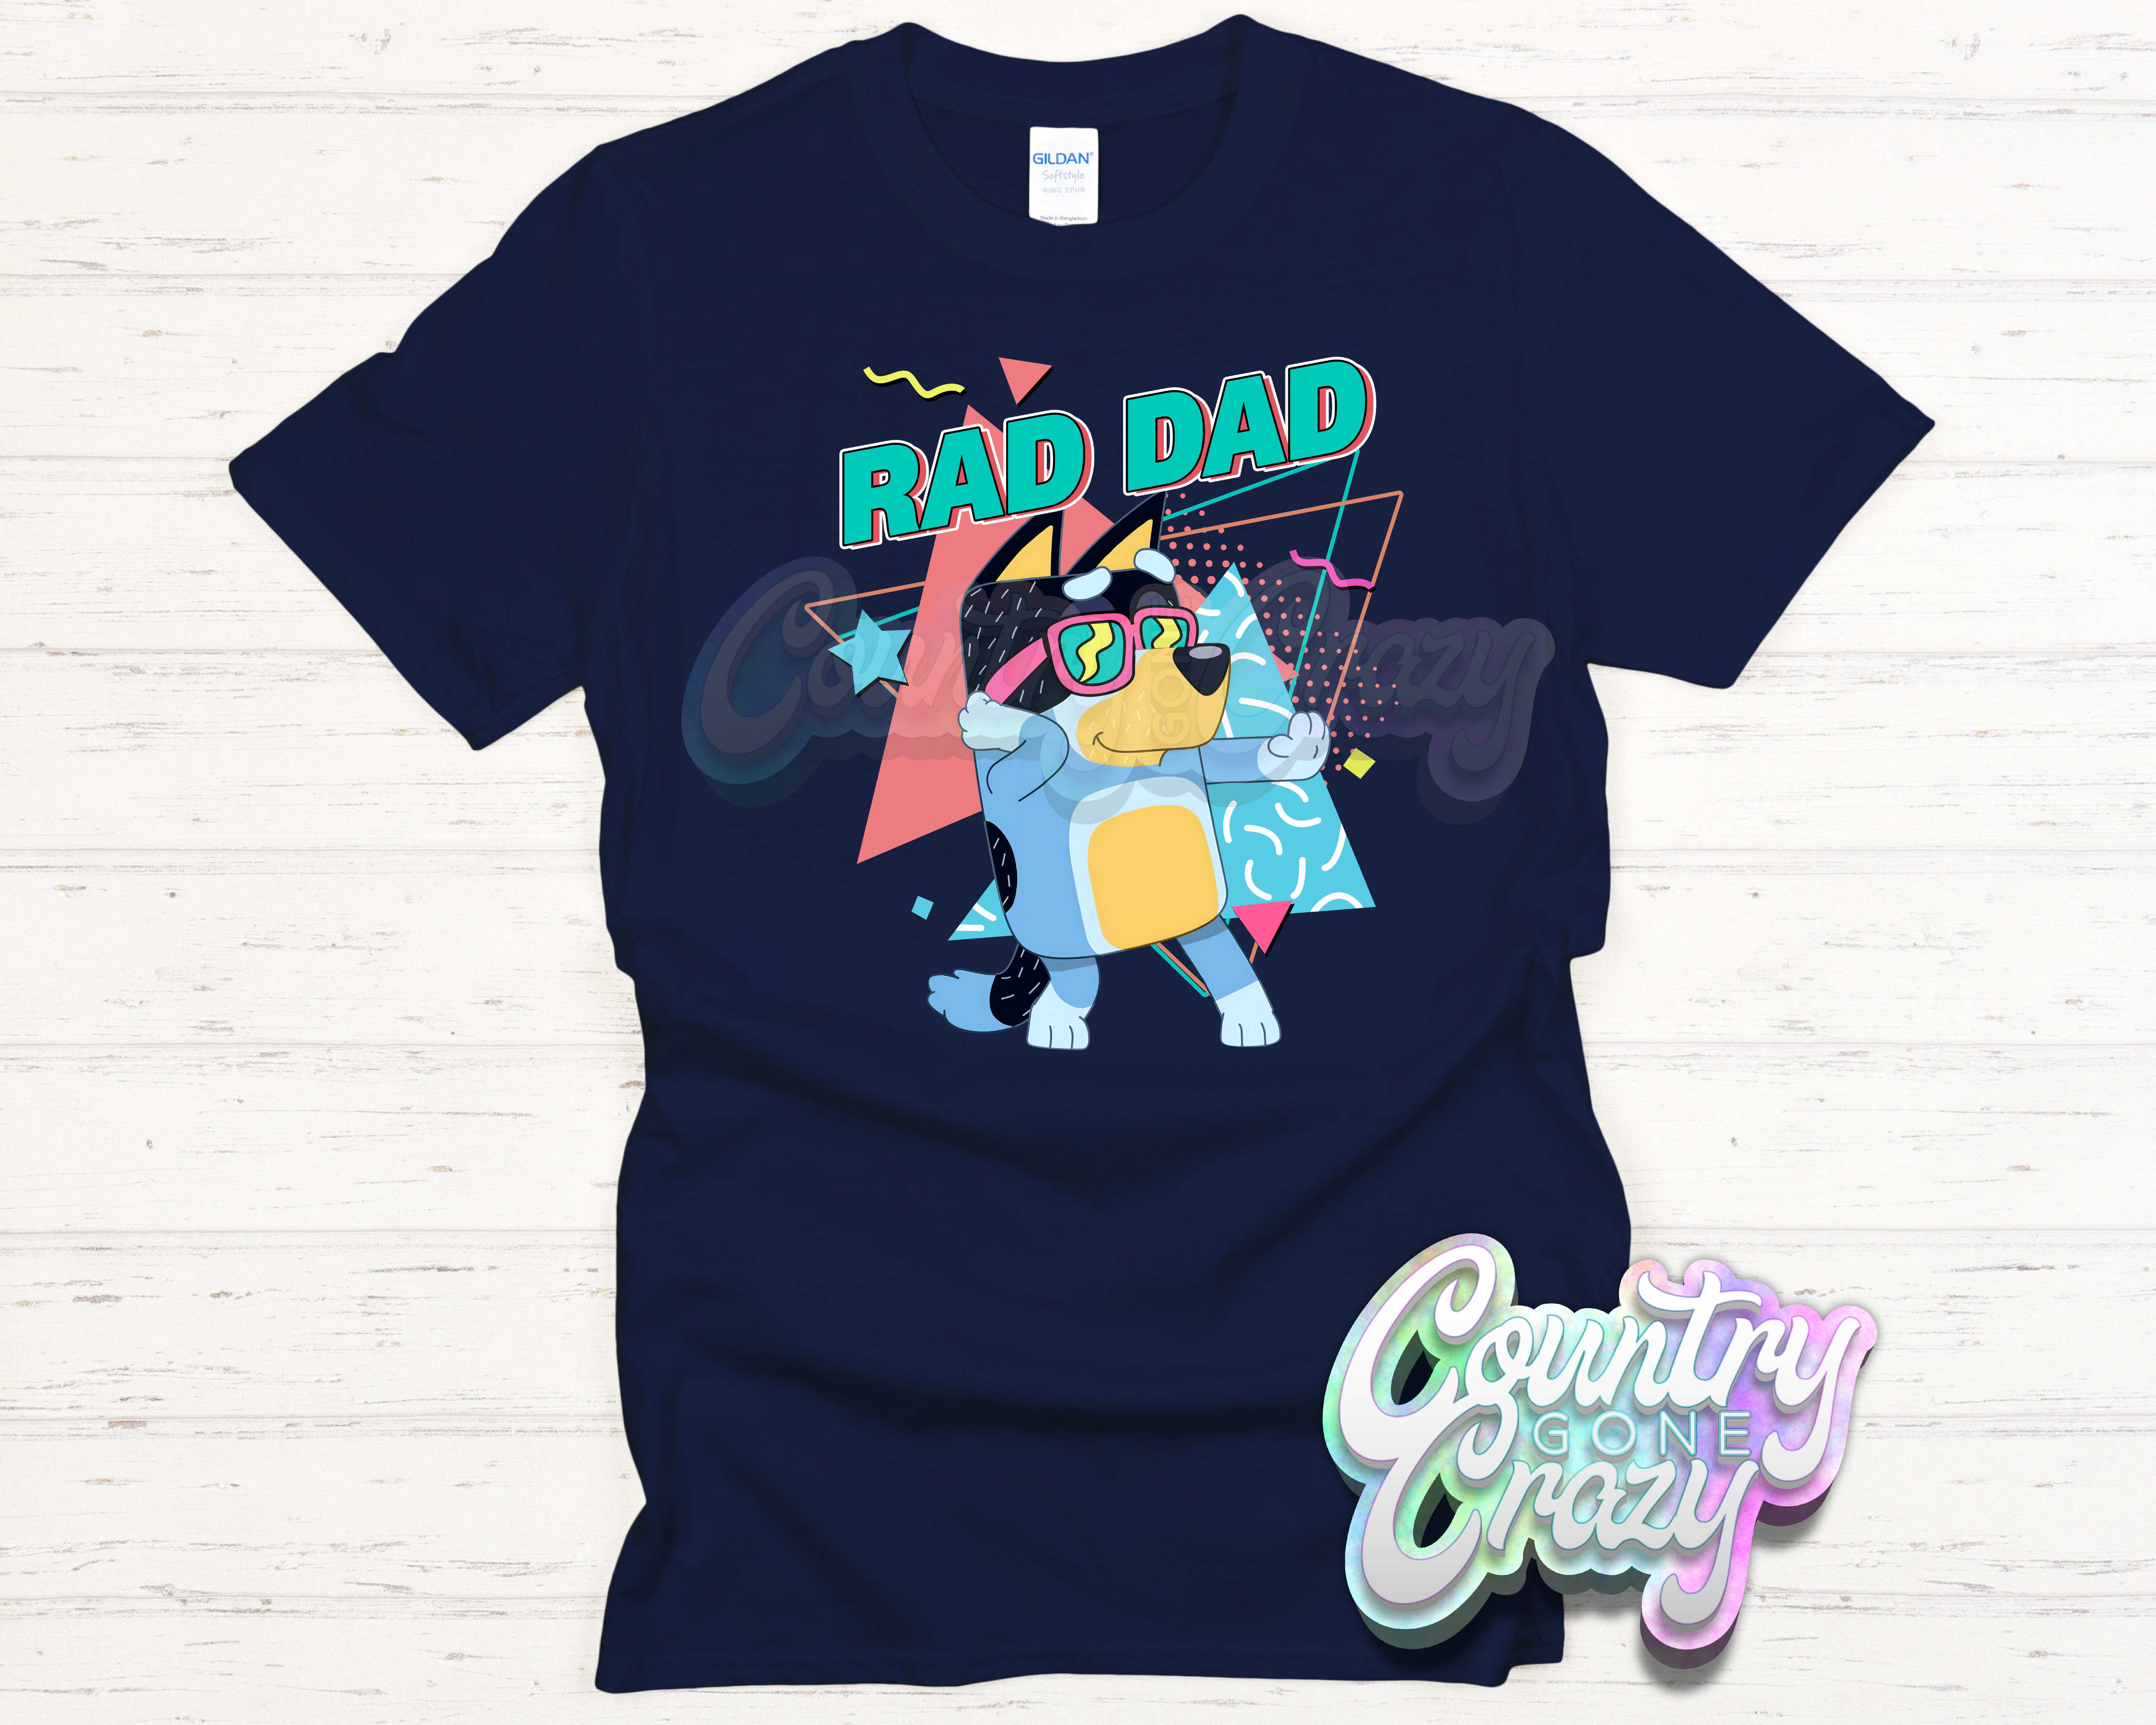 Country Gone Crazy - Vinyl, Shirts, Banners & More!